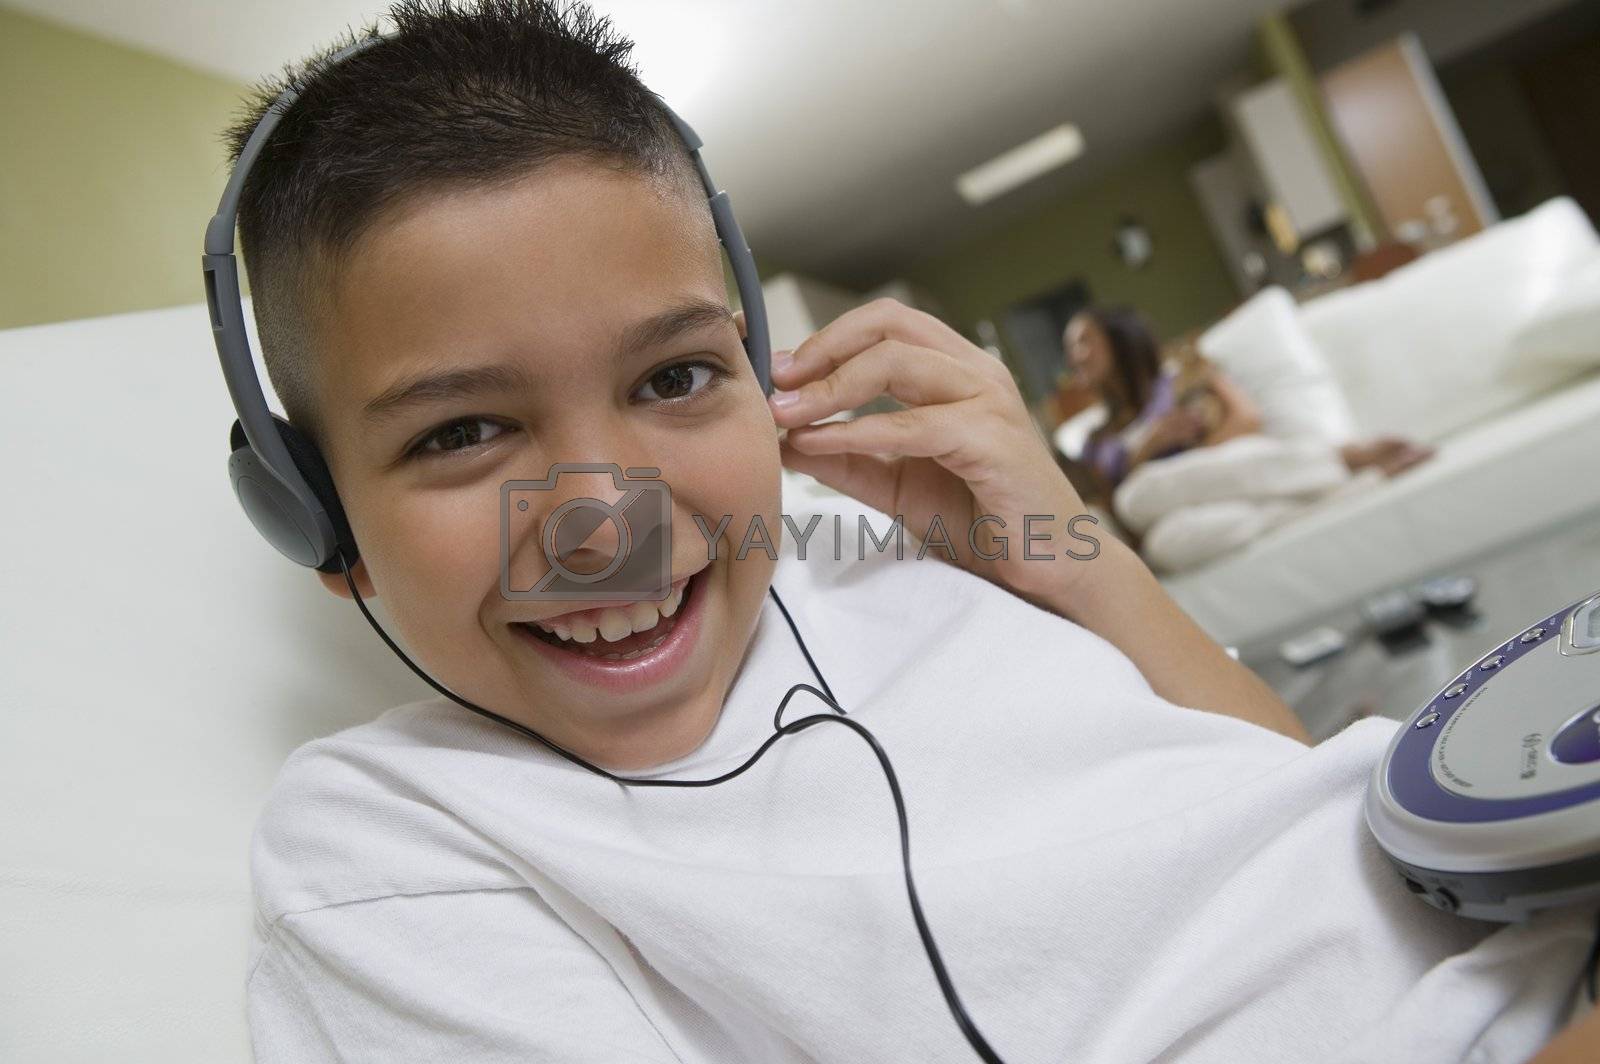 Royalty free image of Boy Listening to Music on Portable CD Player by moodboard